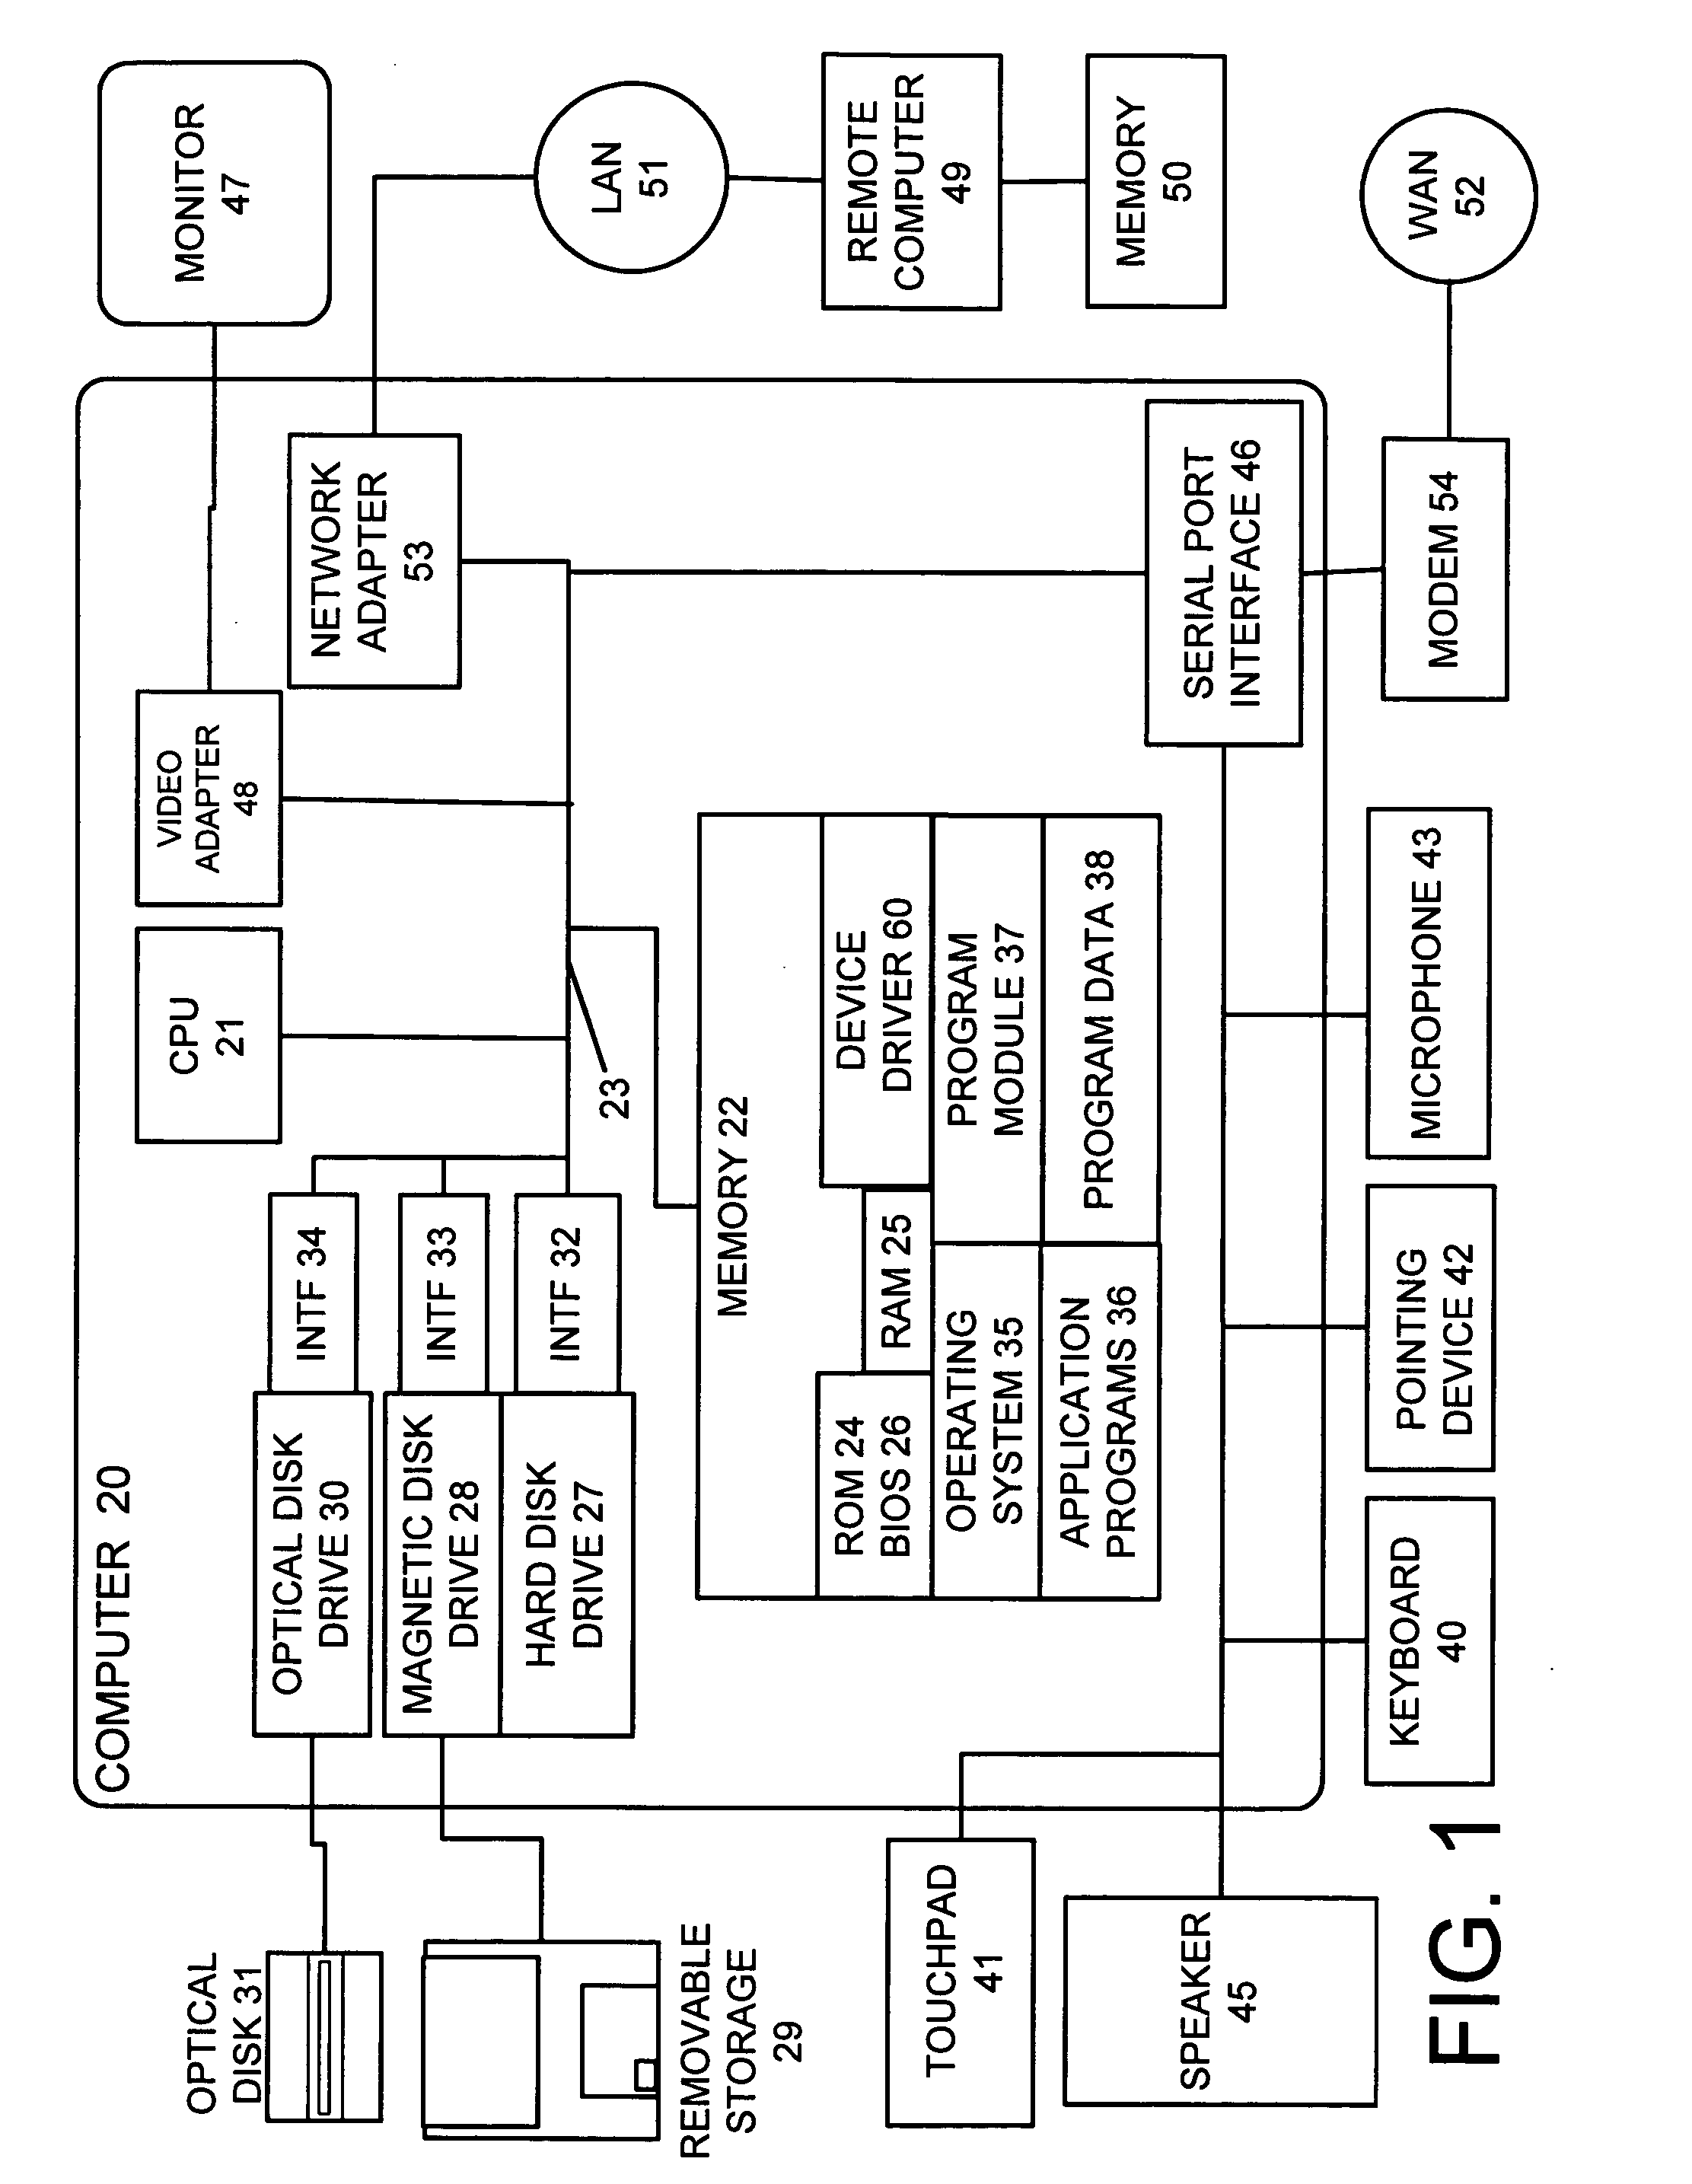 Method and apparatus for providing a three-dimensional task gallery computer interface